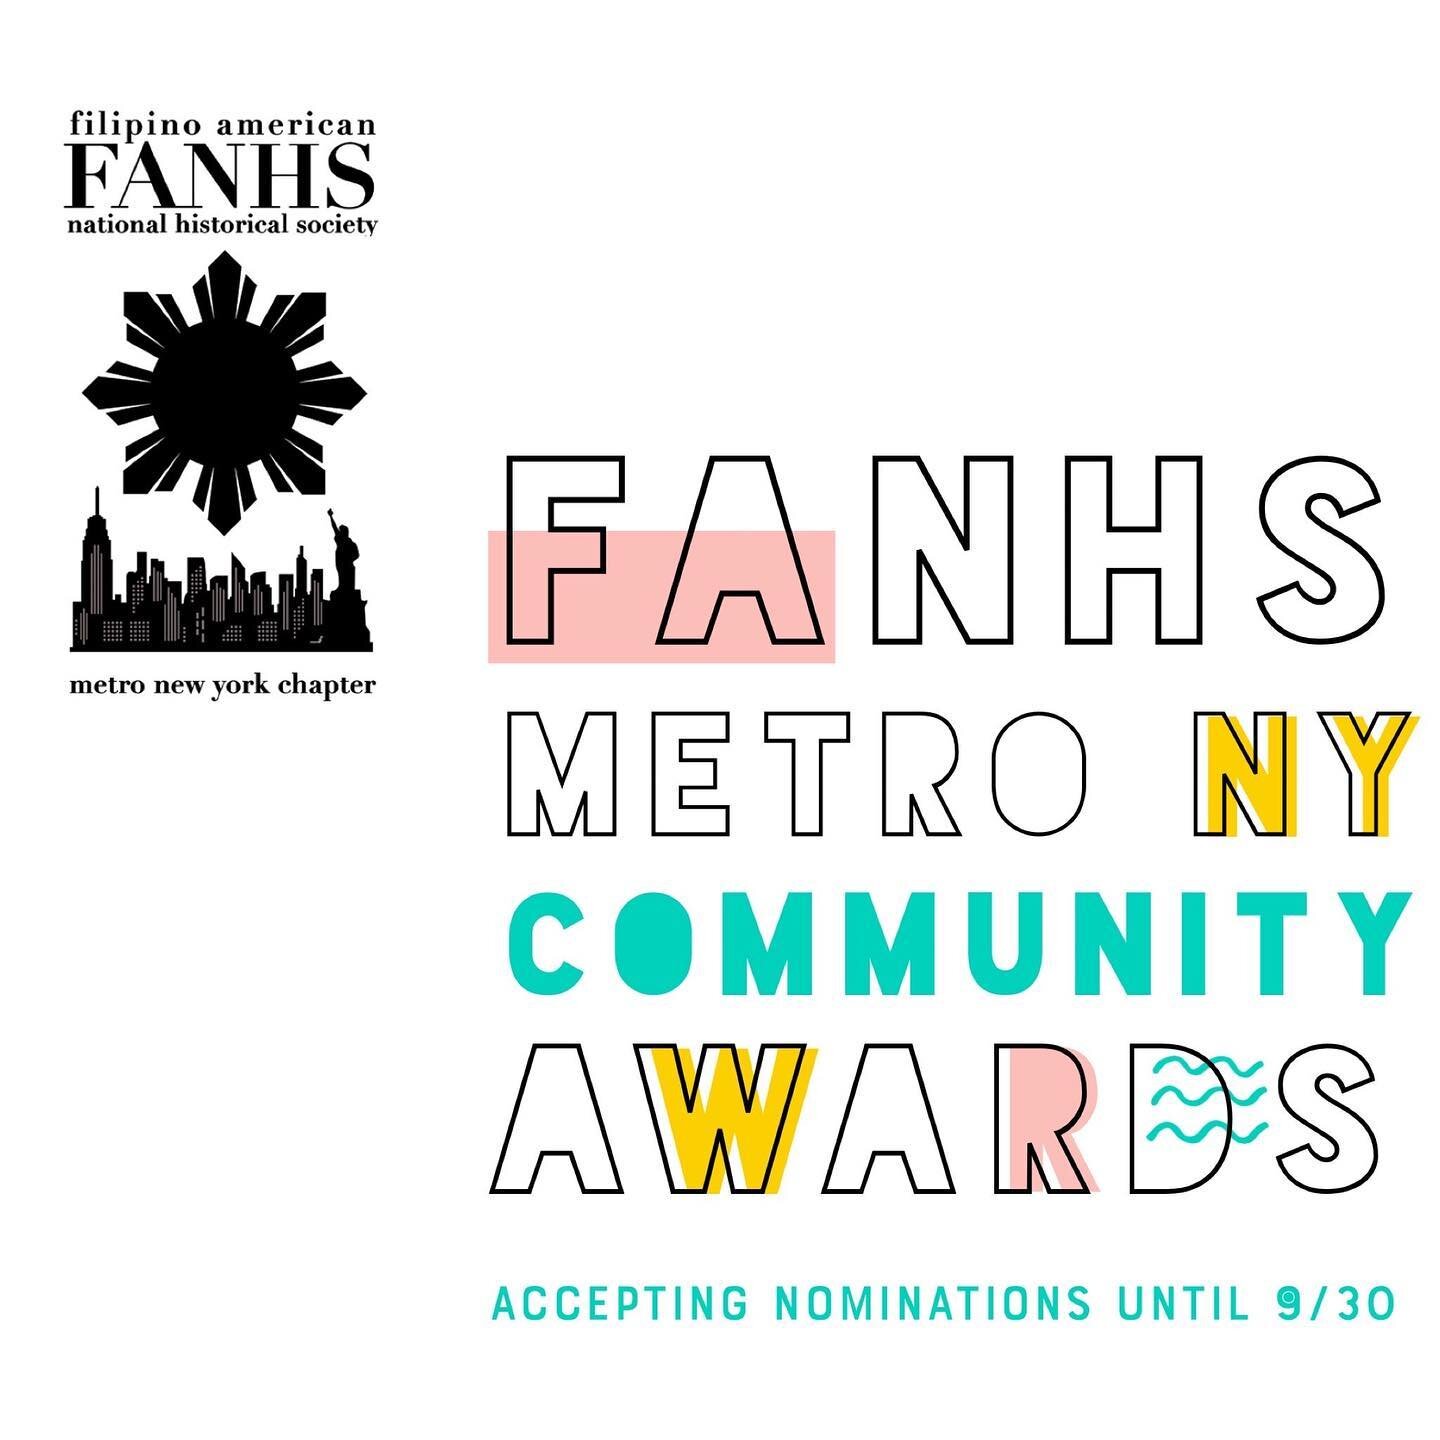 @fanhsmny&rsquo;s 10th Annual Metro NY Community Awards is accepting nominations! Link + details in bio!  Deadline is Sept 30th.

2020 Award Categories: Distinguished Young Professional, Contributions to Excellence, Outstanding Artist, Bayani, &amp; 